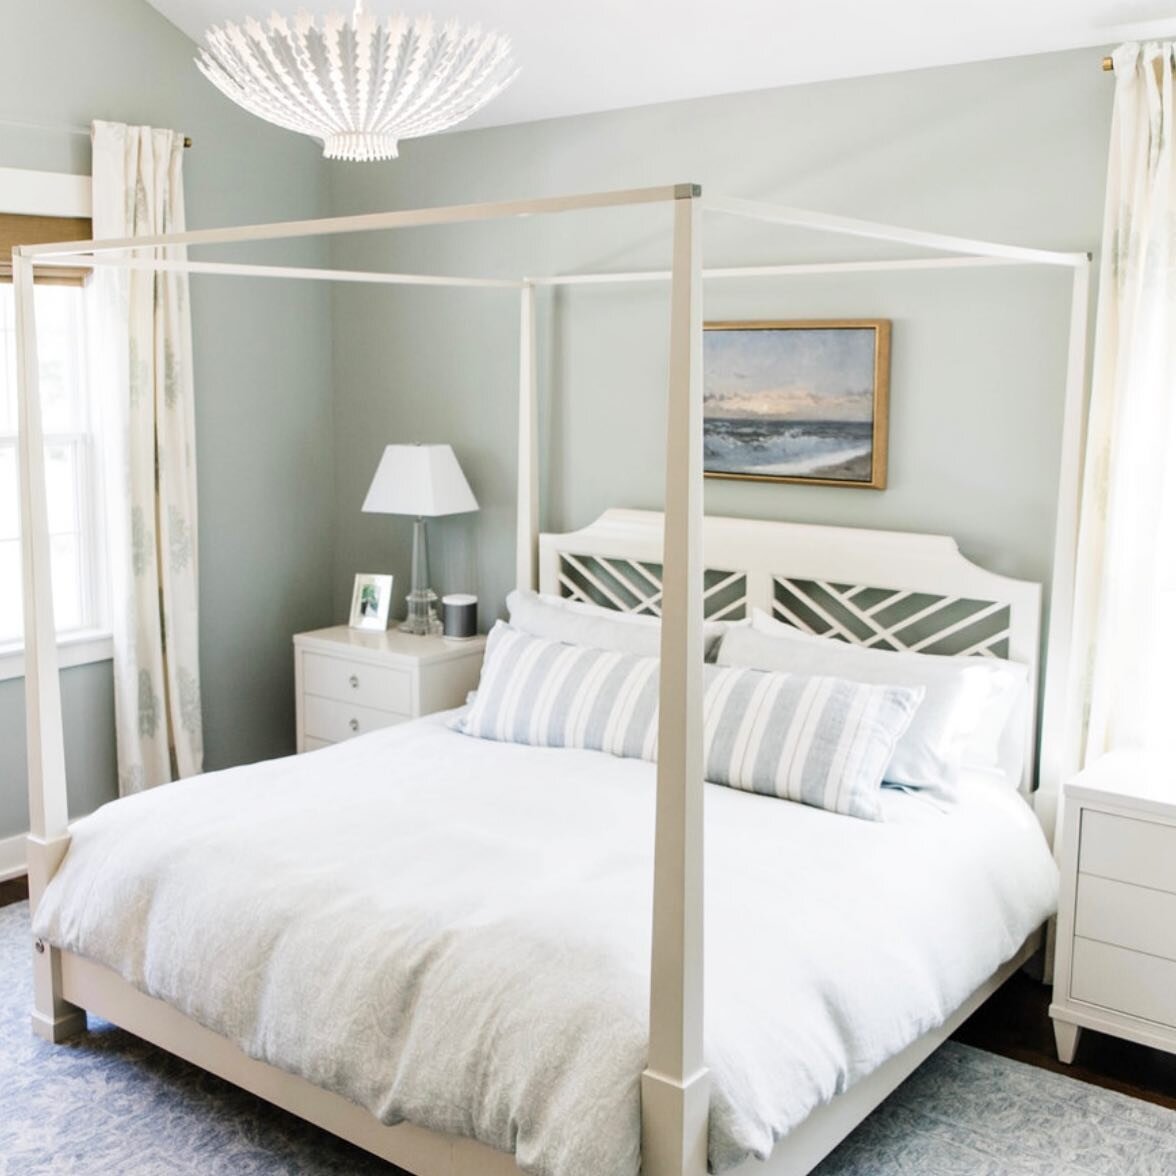 We take napping seriously....and we seriously considered asking if we could take one in our clients' home in this dreamy Harbor Shores master suite. 

Happy National Nap Day.  Make sure you celebrate in a dreamy spot today!

📷 @brenna_lynnn 
.
.
.
#